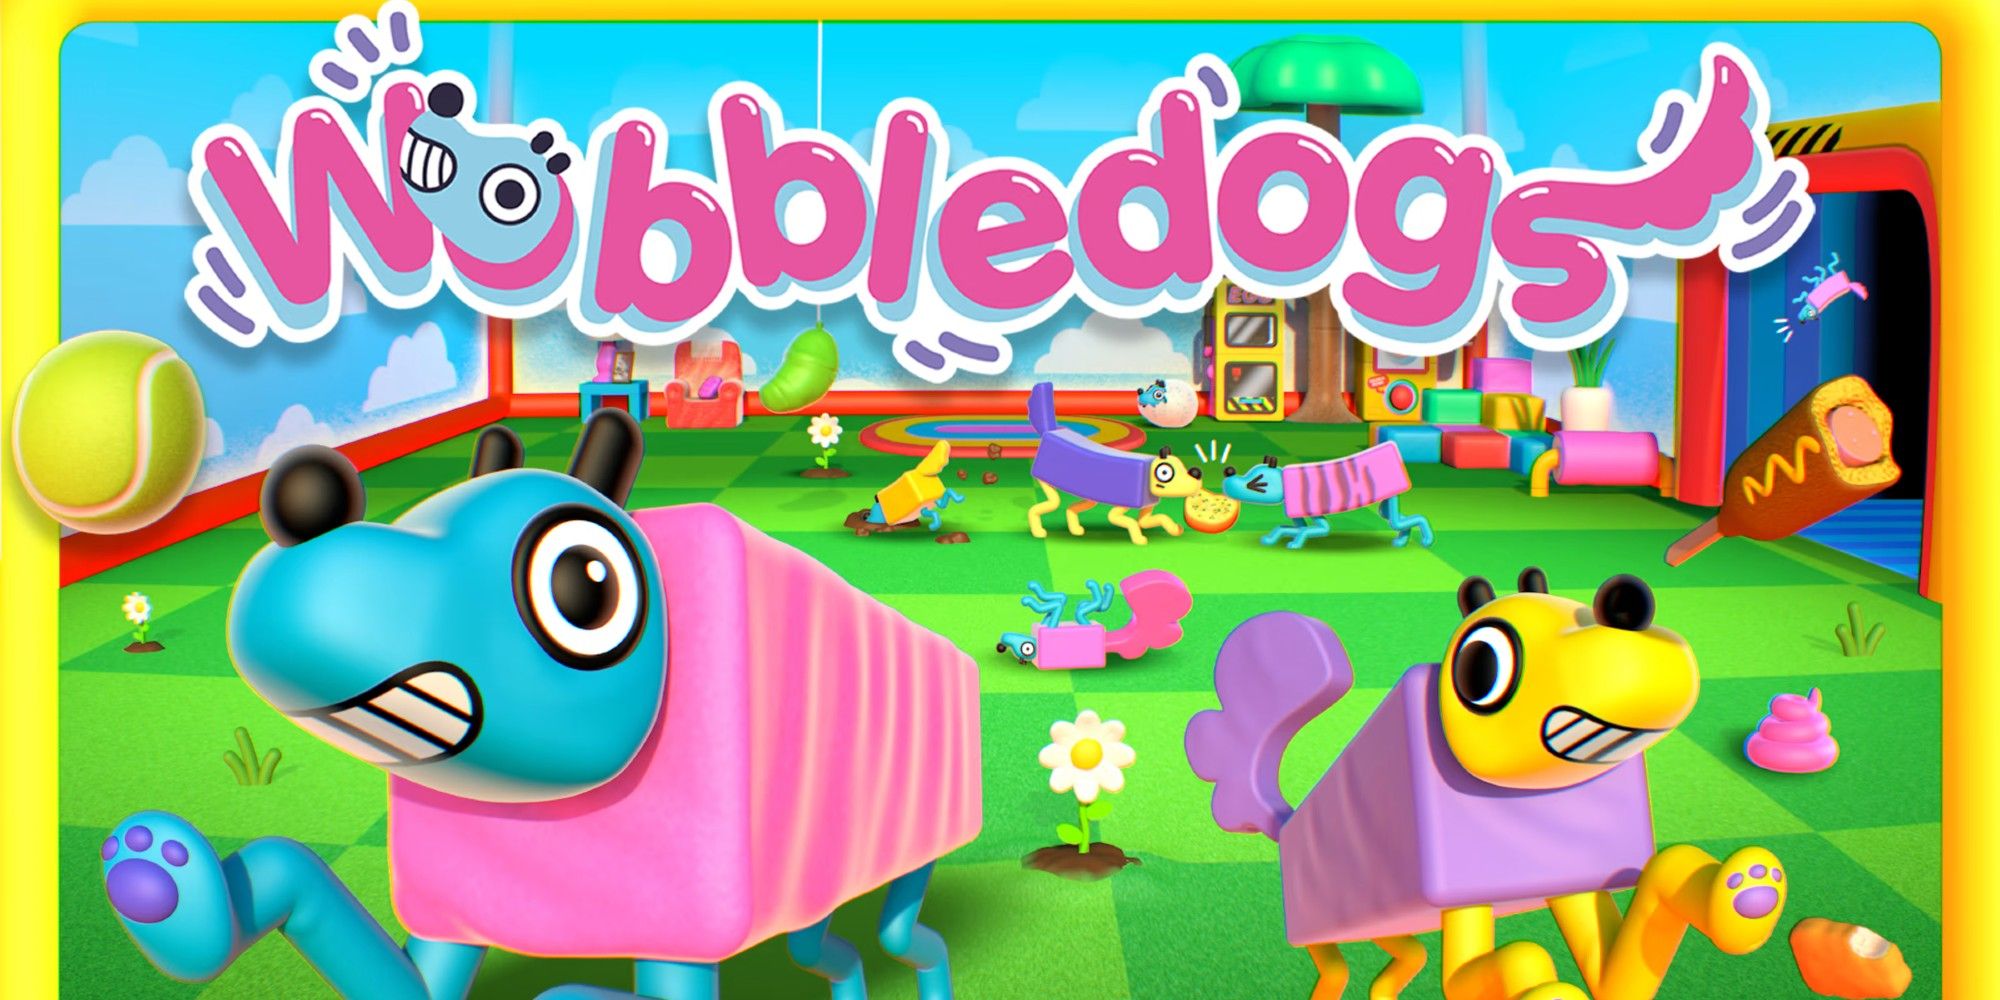 Wobbledogs Key Art showing several dogs in a play room and the game's title.